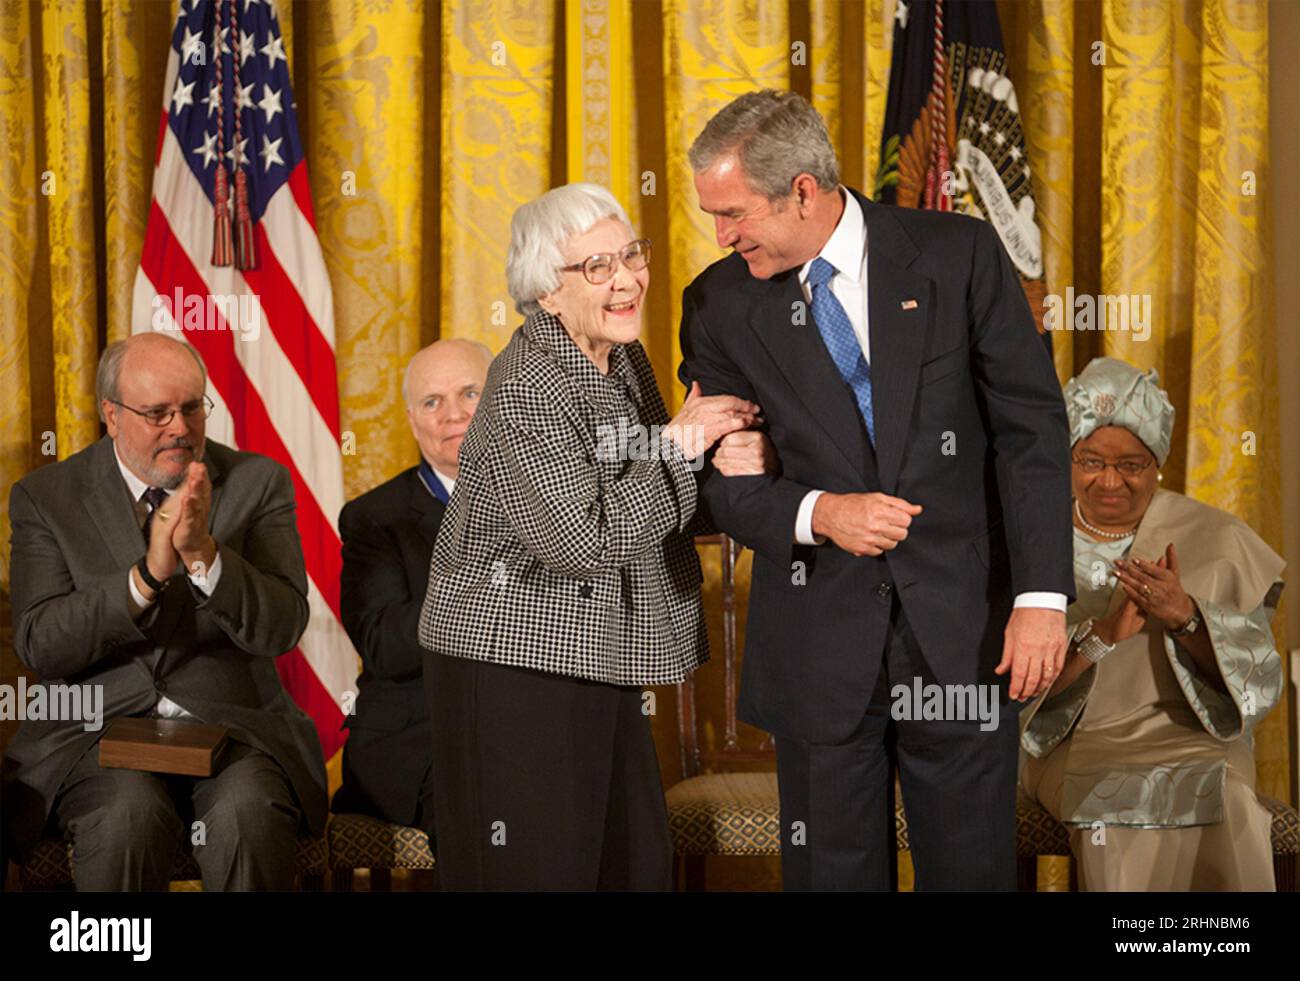 HARPER LEE (1926-2016) The American novelist being awarded the Presidential Medal of Freedom by President George Bush, 5 November 2007 Stock Photo